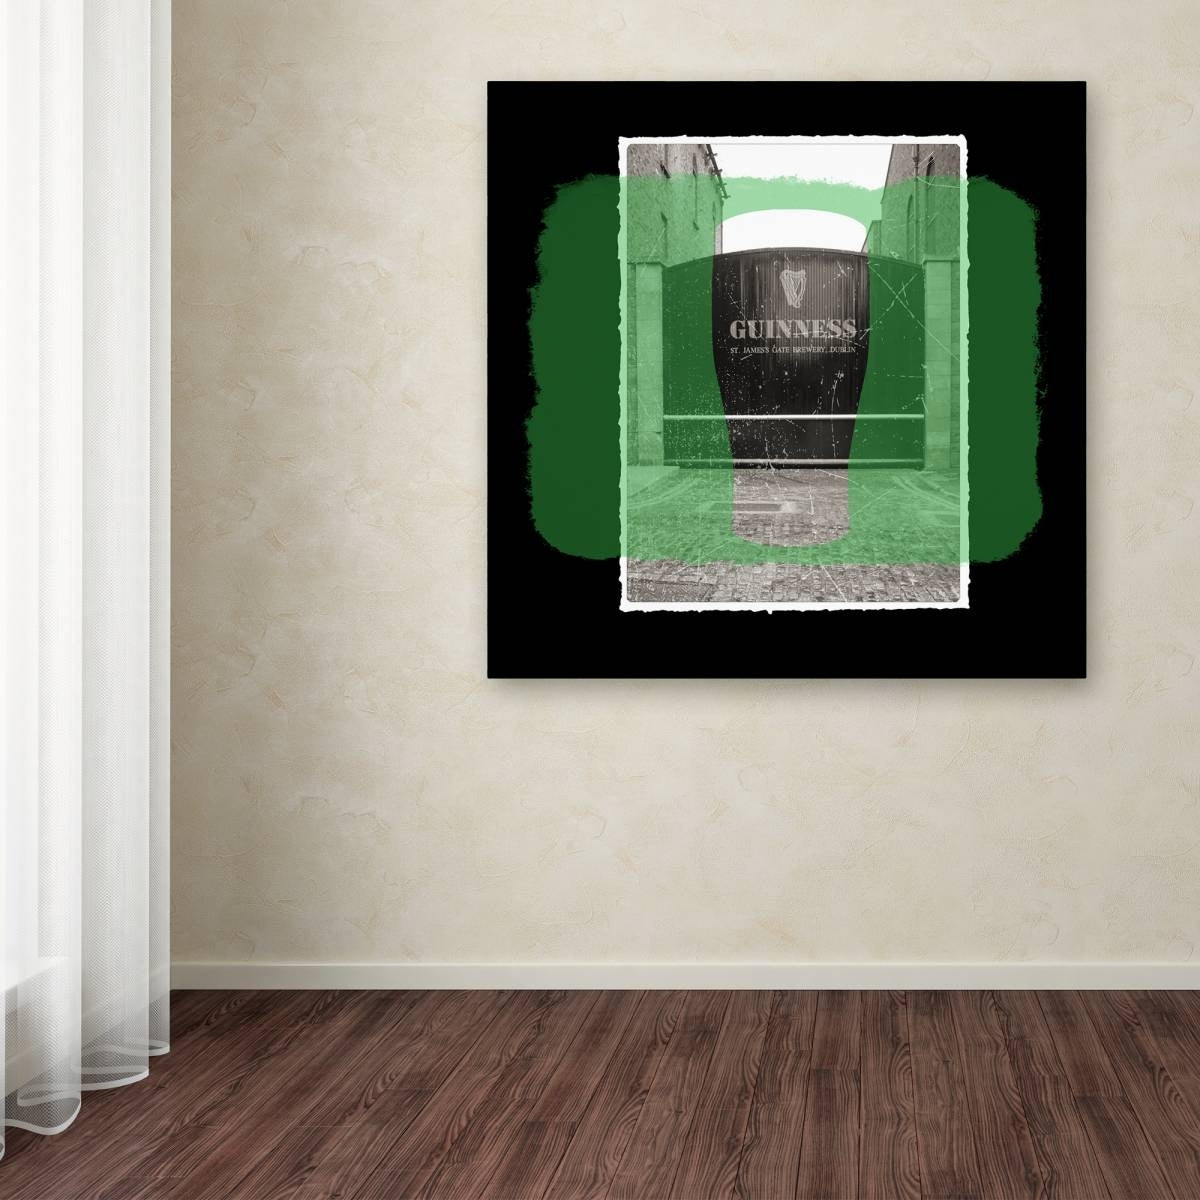 A Guinness Brewery 'Guinness XIV' canvas art portraying a black and green painting on a wall in a room.